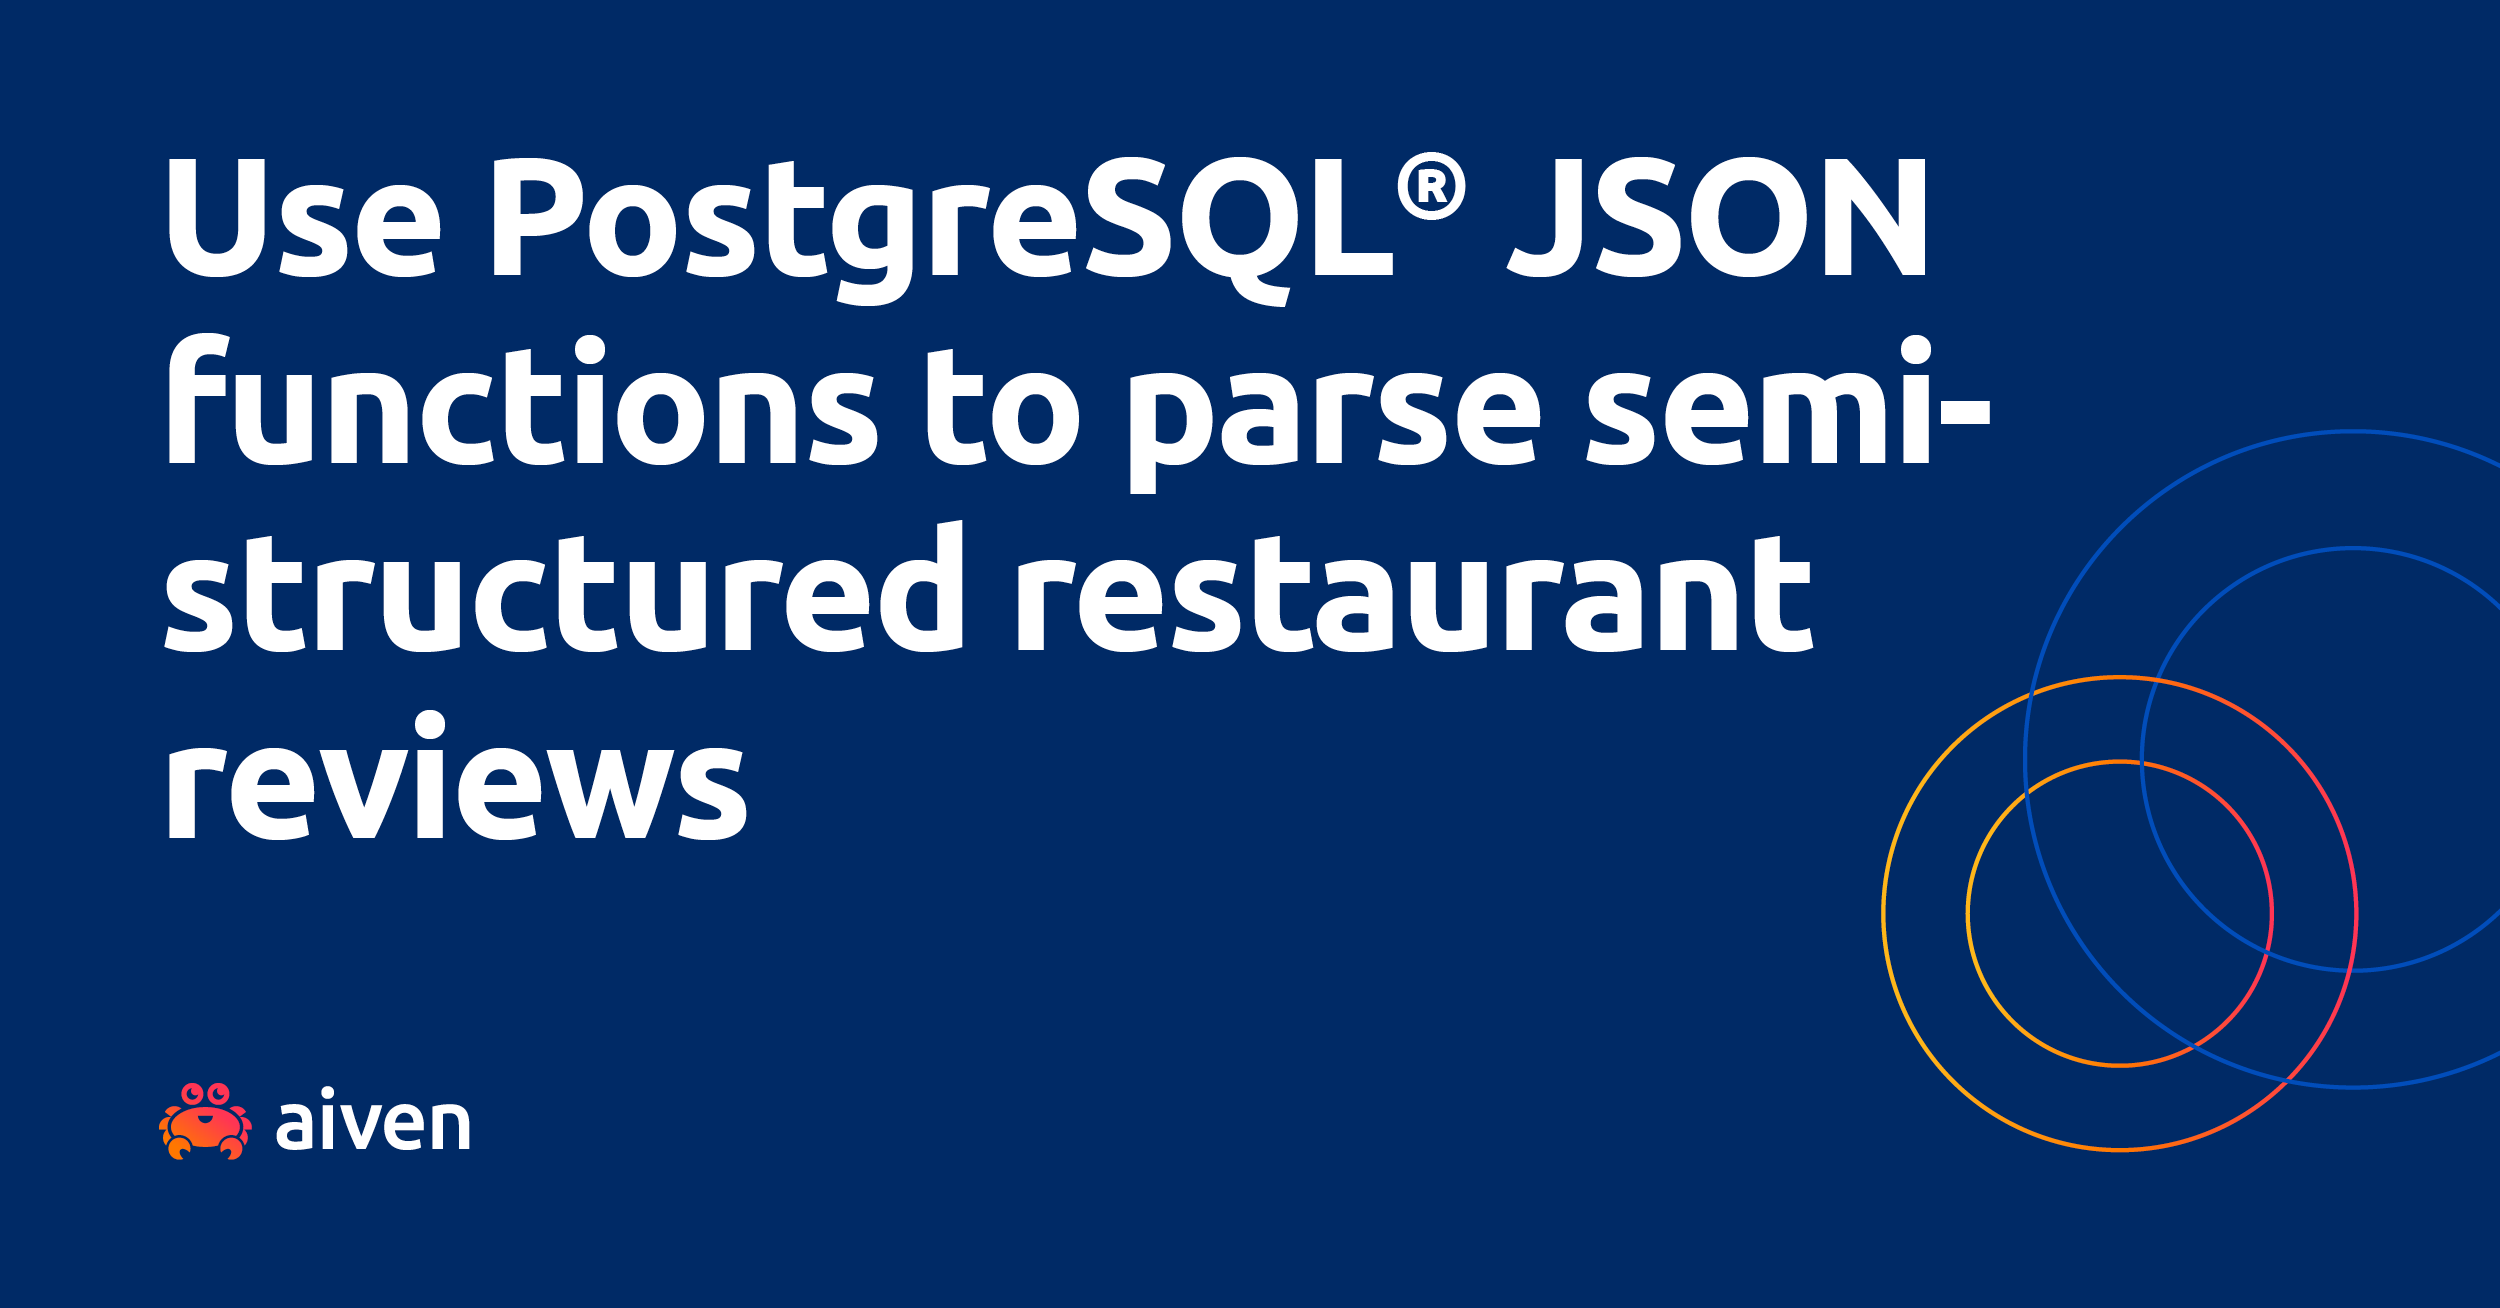 A blue background, with the Aiven cuddly crab logo, and a pair of overlapping rings, perhaps evoking the idea of adjacent search areas. The text reads: Use PostgreSQL® JSON functions to parse semi-structured restaurant reviews. If we can use a database to choose baby names, you should expect us to use a database to choose where to eat.